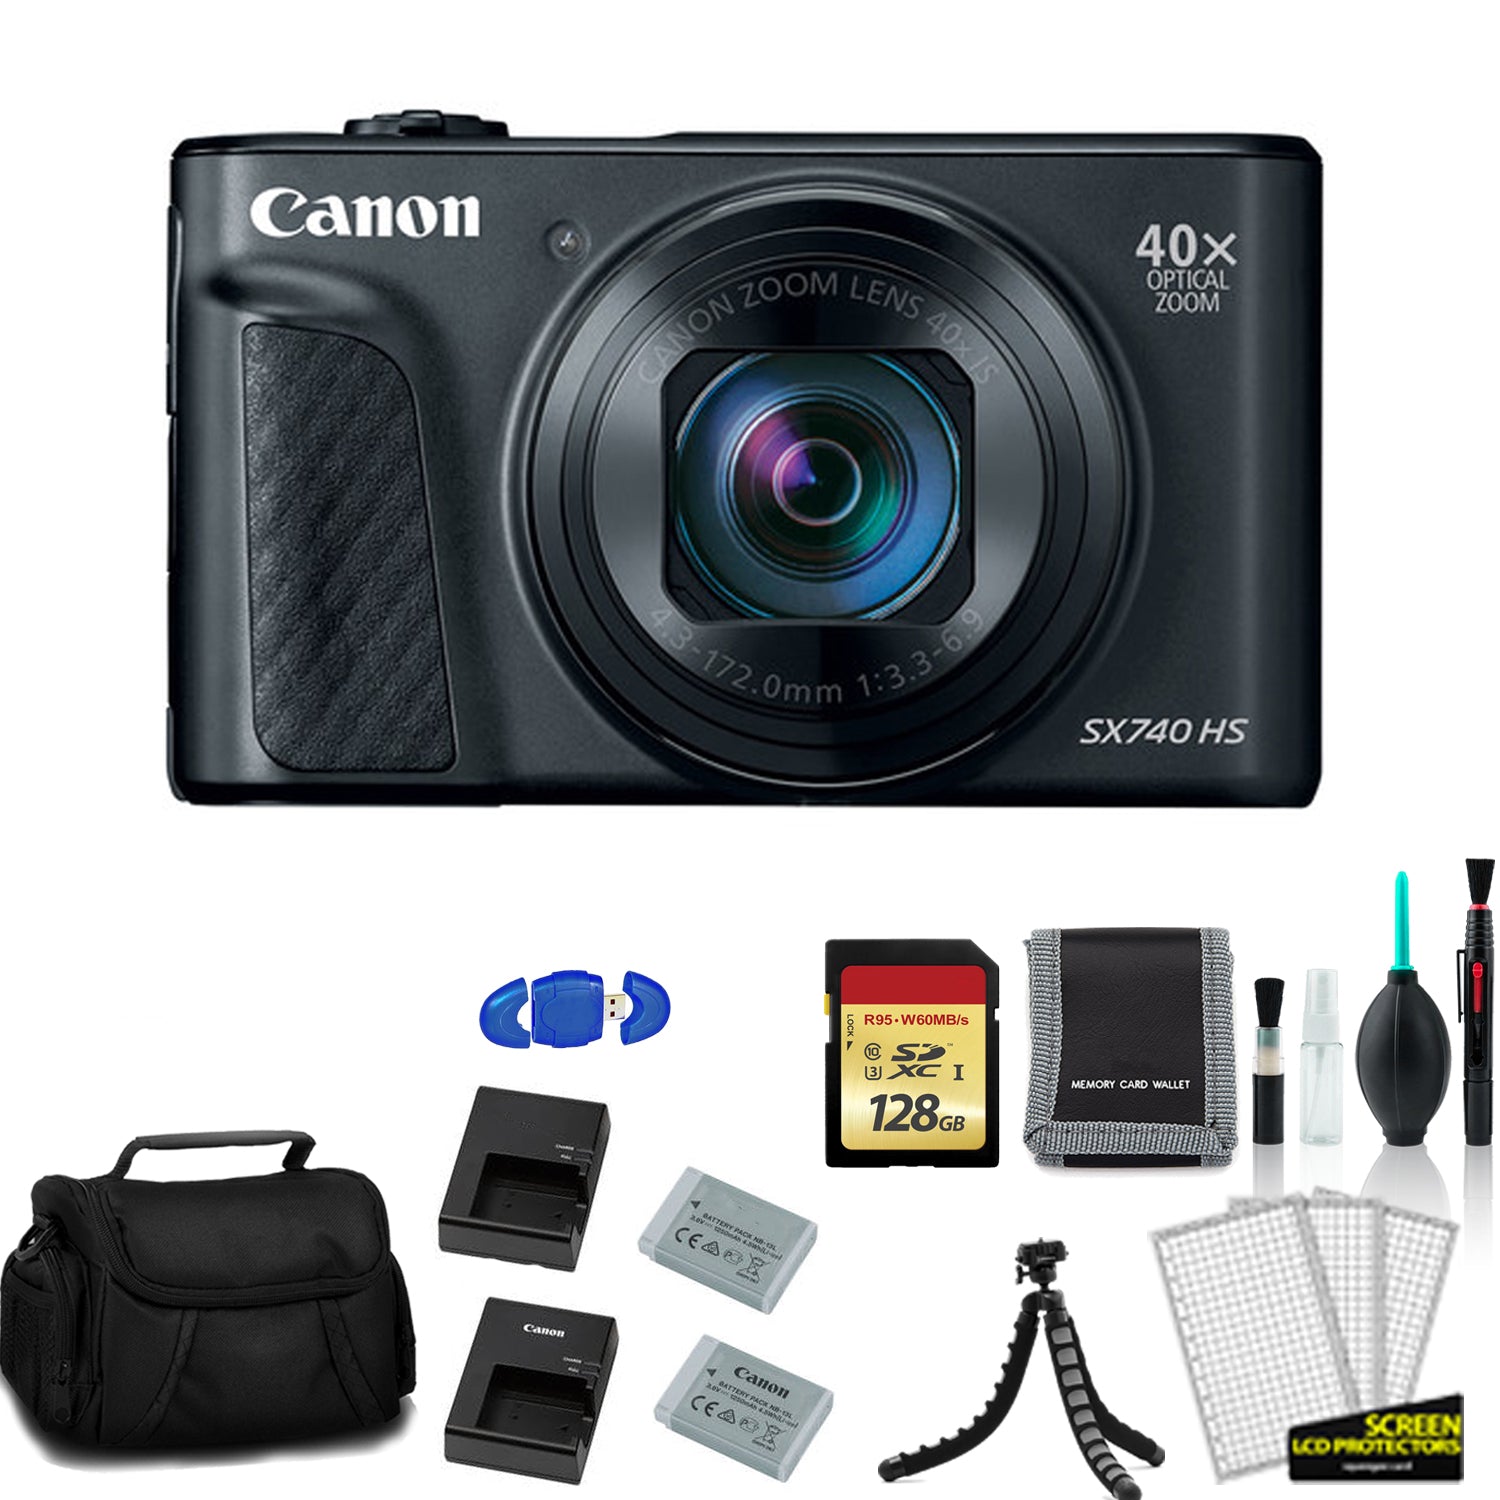 Canon PowerShot SX740 HS Digital Camera (Black) with 128GB Memory Card + Extra Battery and Charger + More - International Model